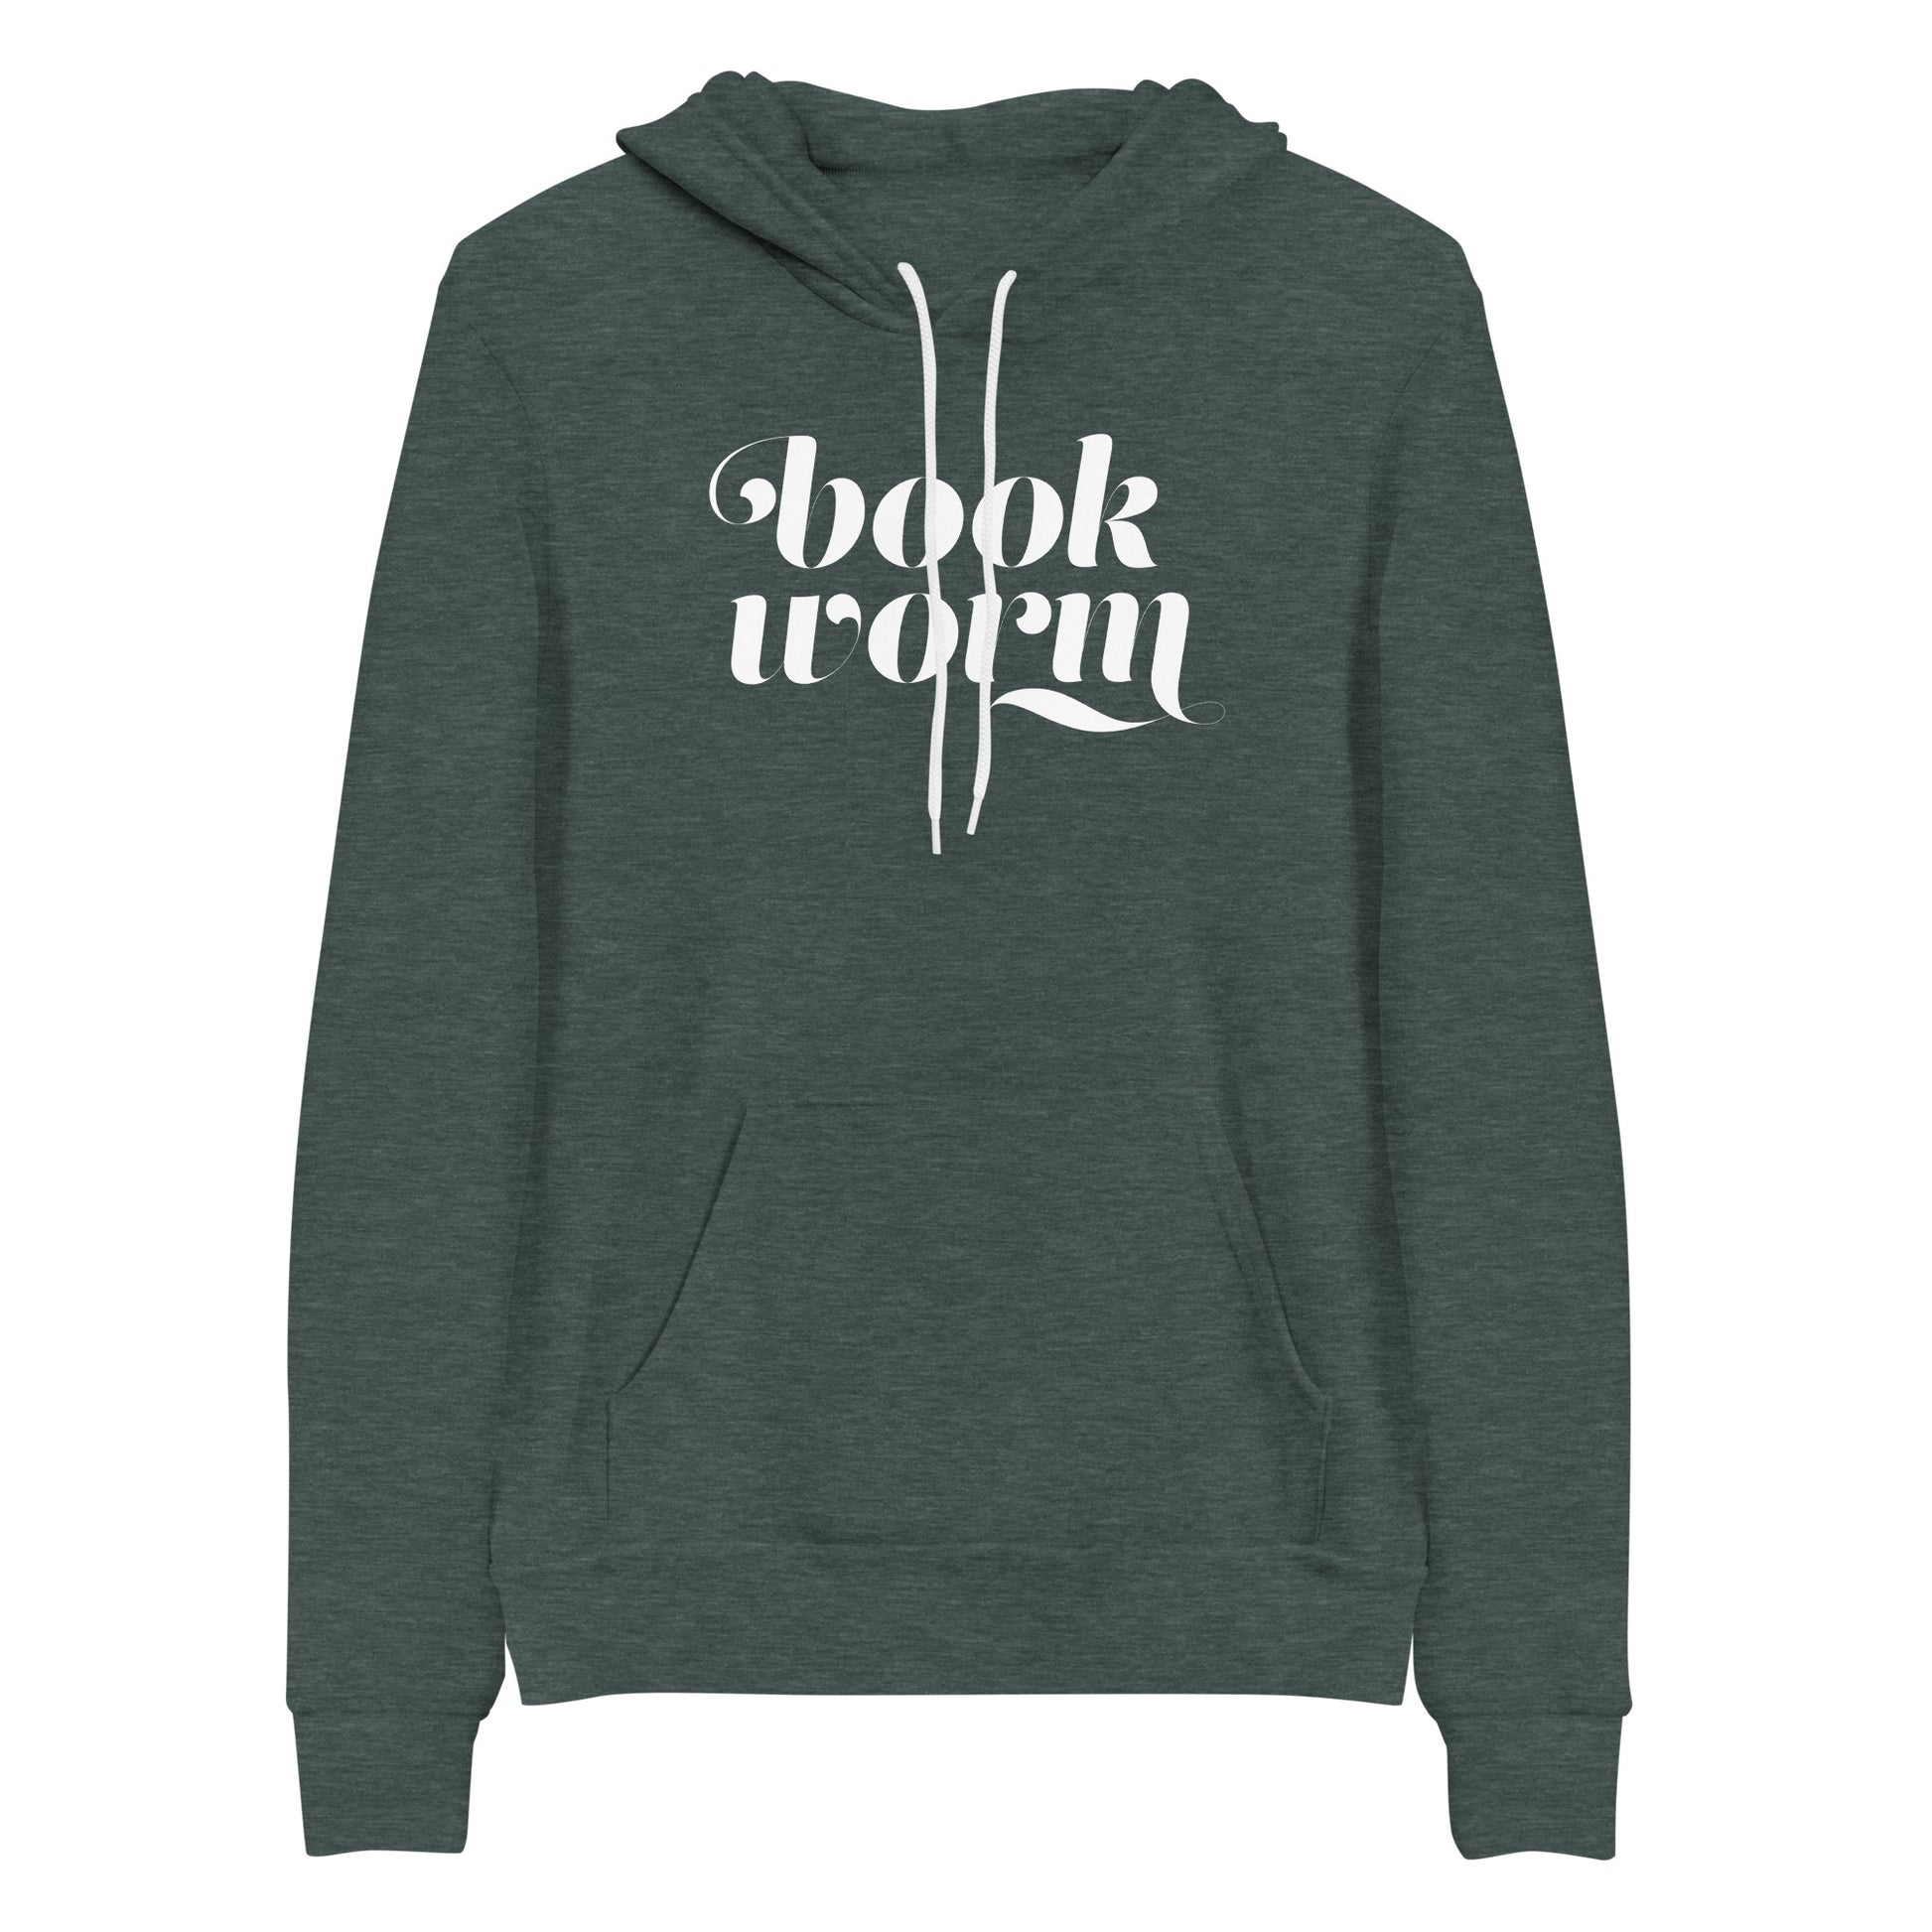 Cozy Book Worm Hoodie Sweatshirt for Reading Lovers - Heather Forest